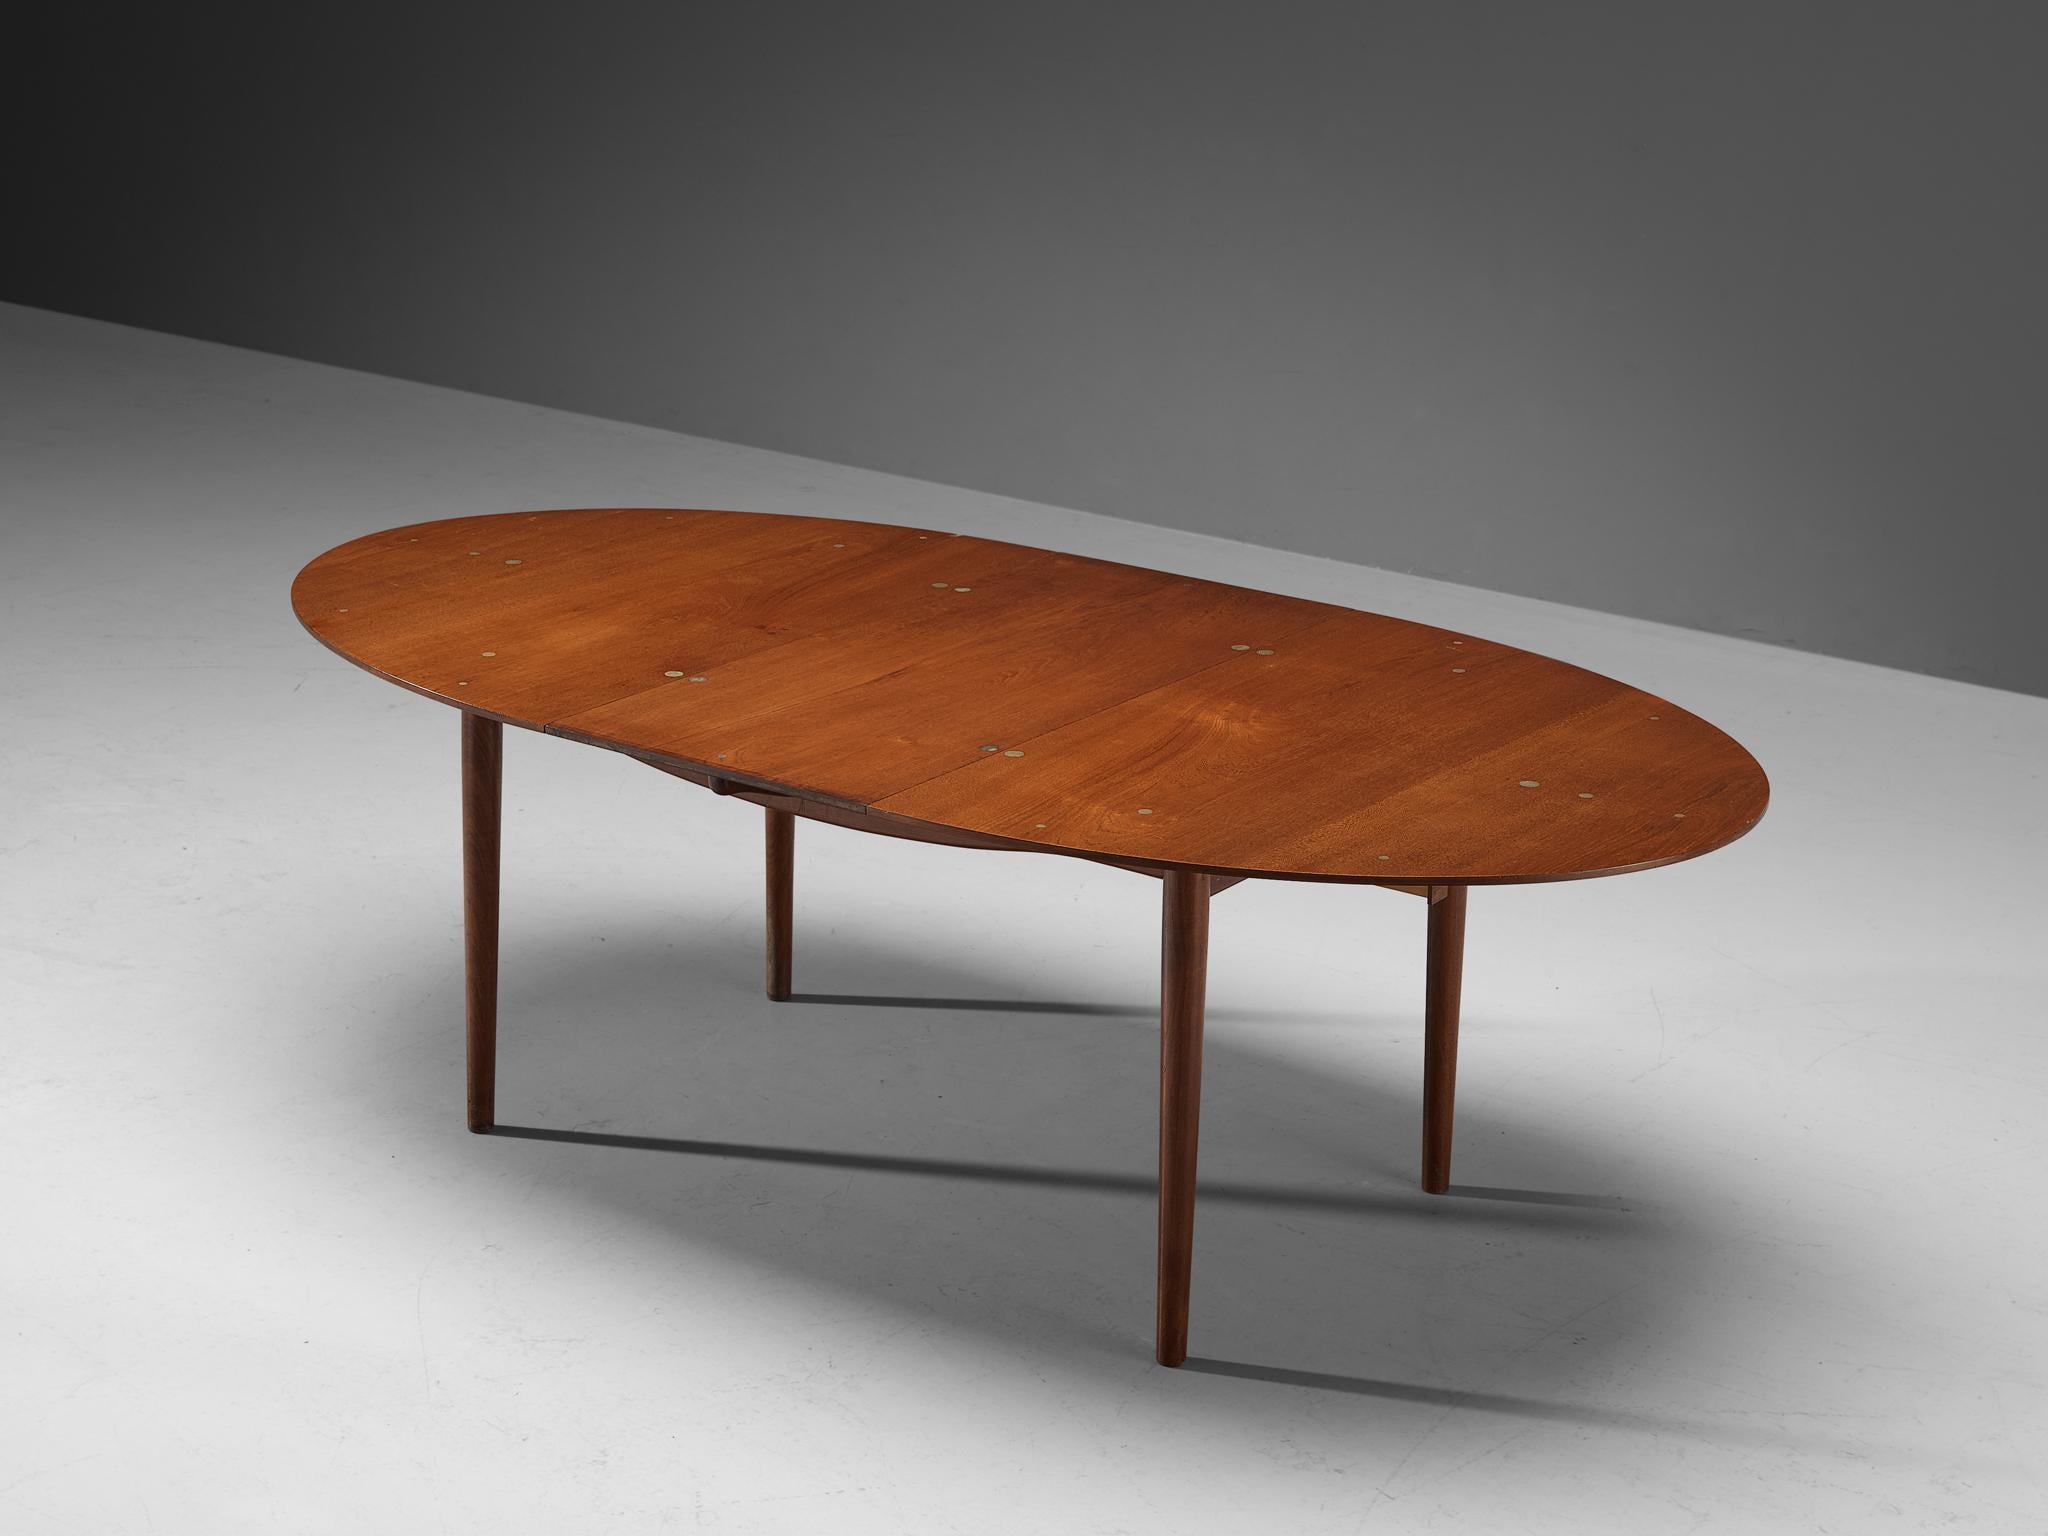 Finn Juhl for Niels Vodder Dining Table ‘Judas’ in Teak and Silver Inlay 1